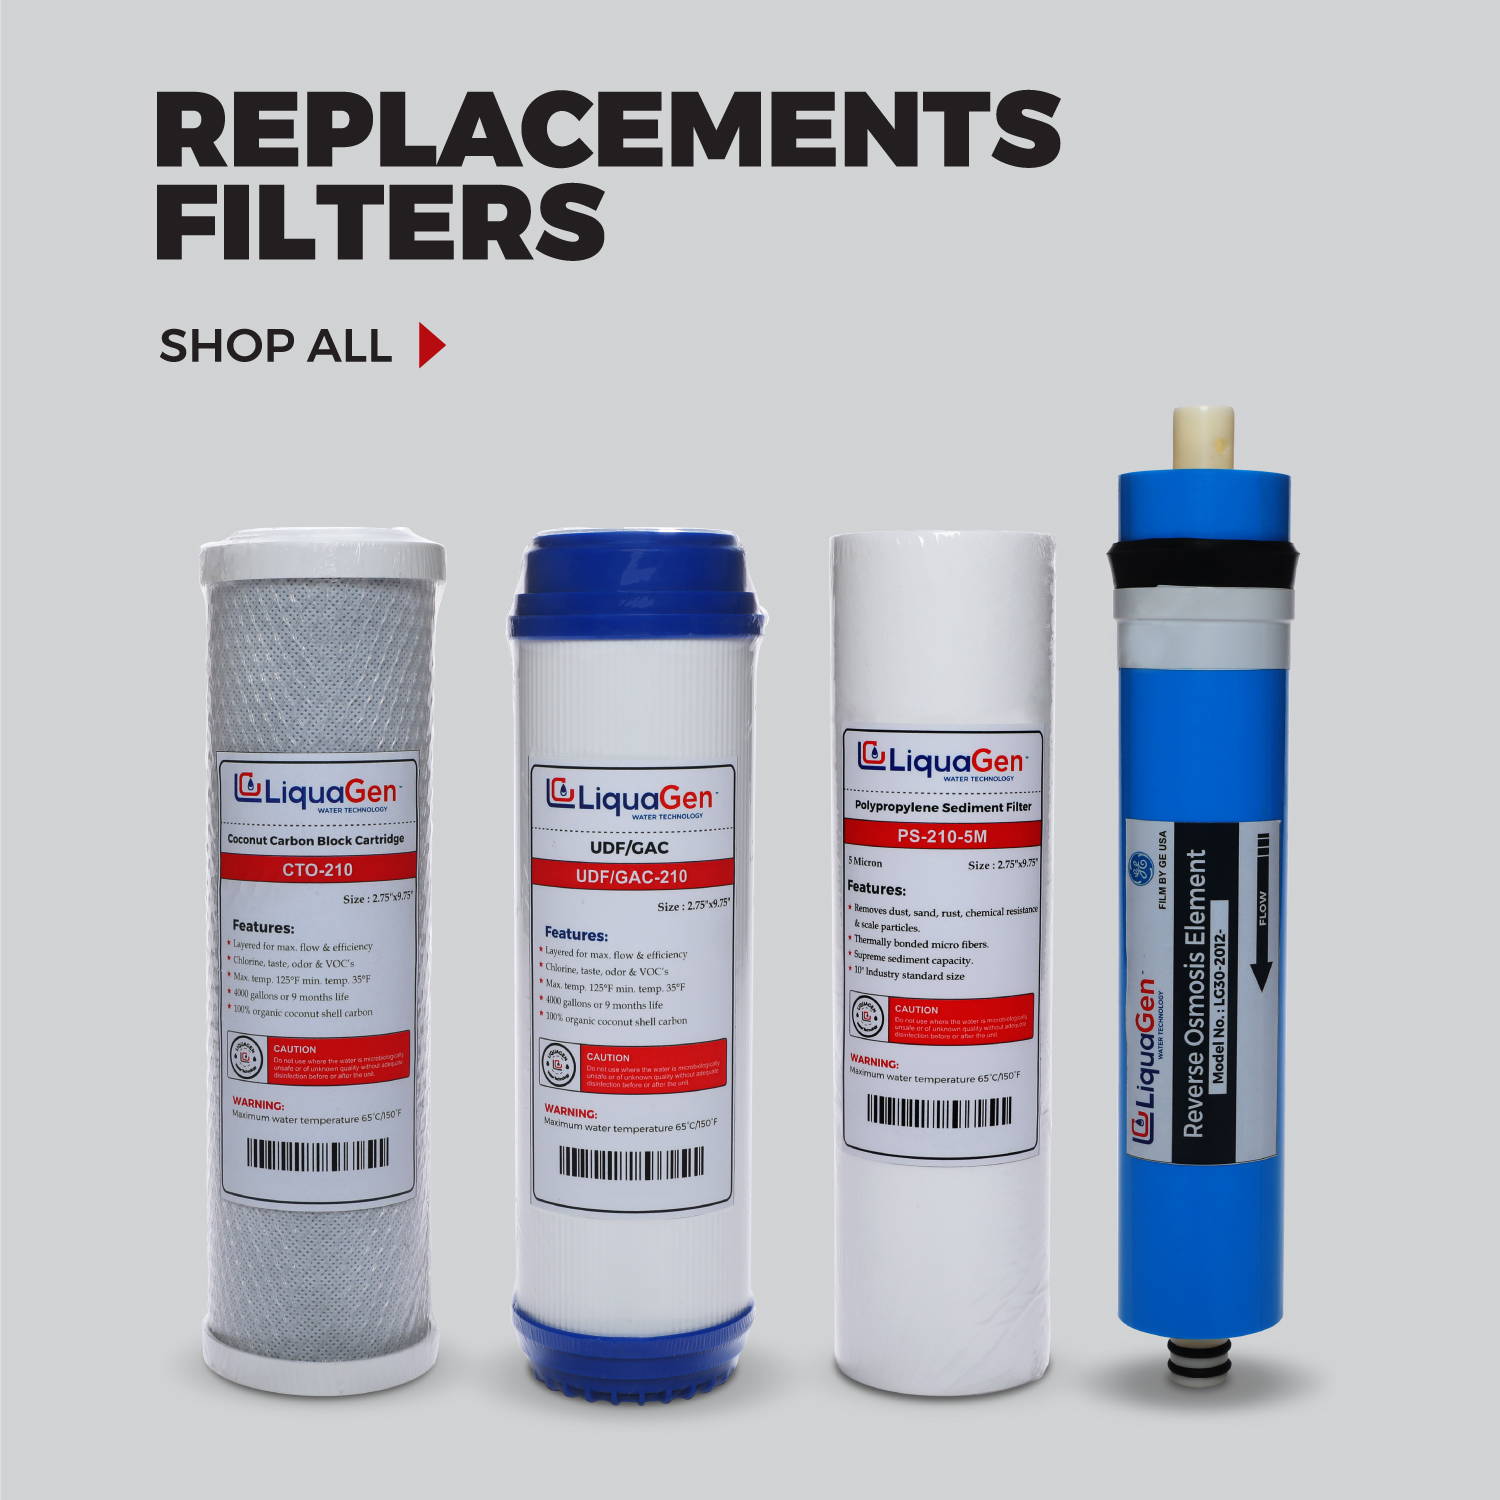 Replacement filters